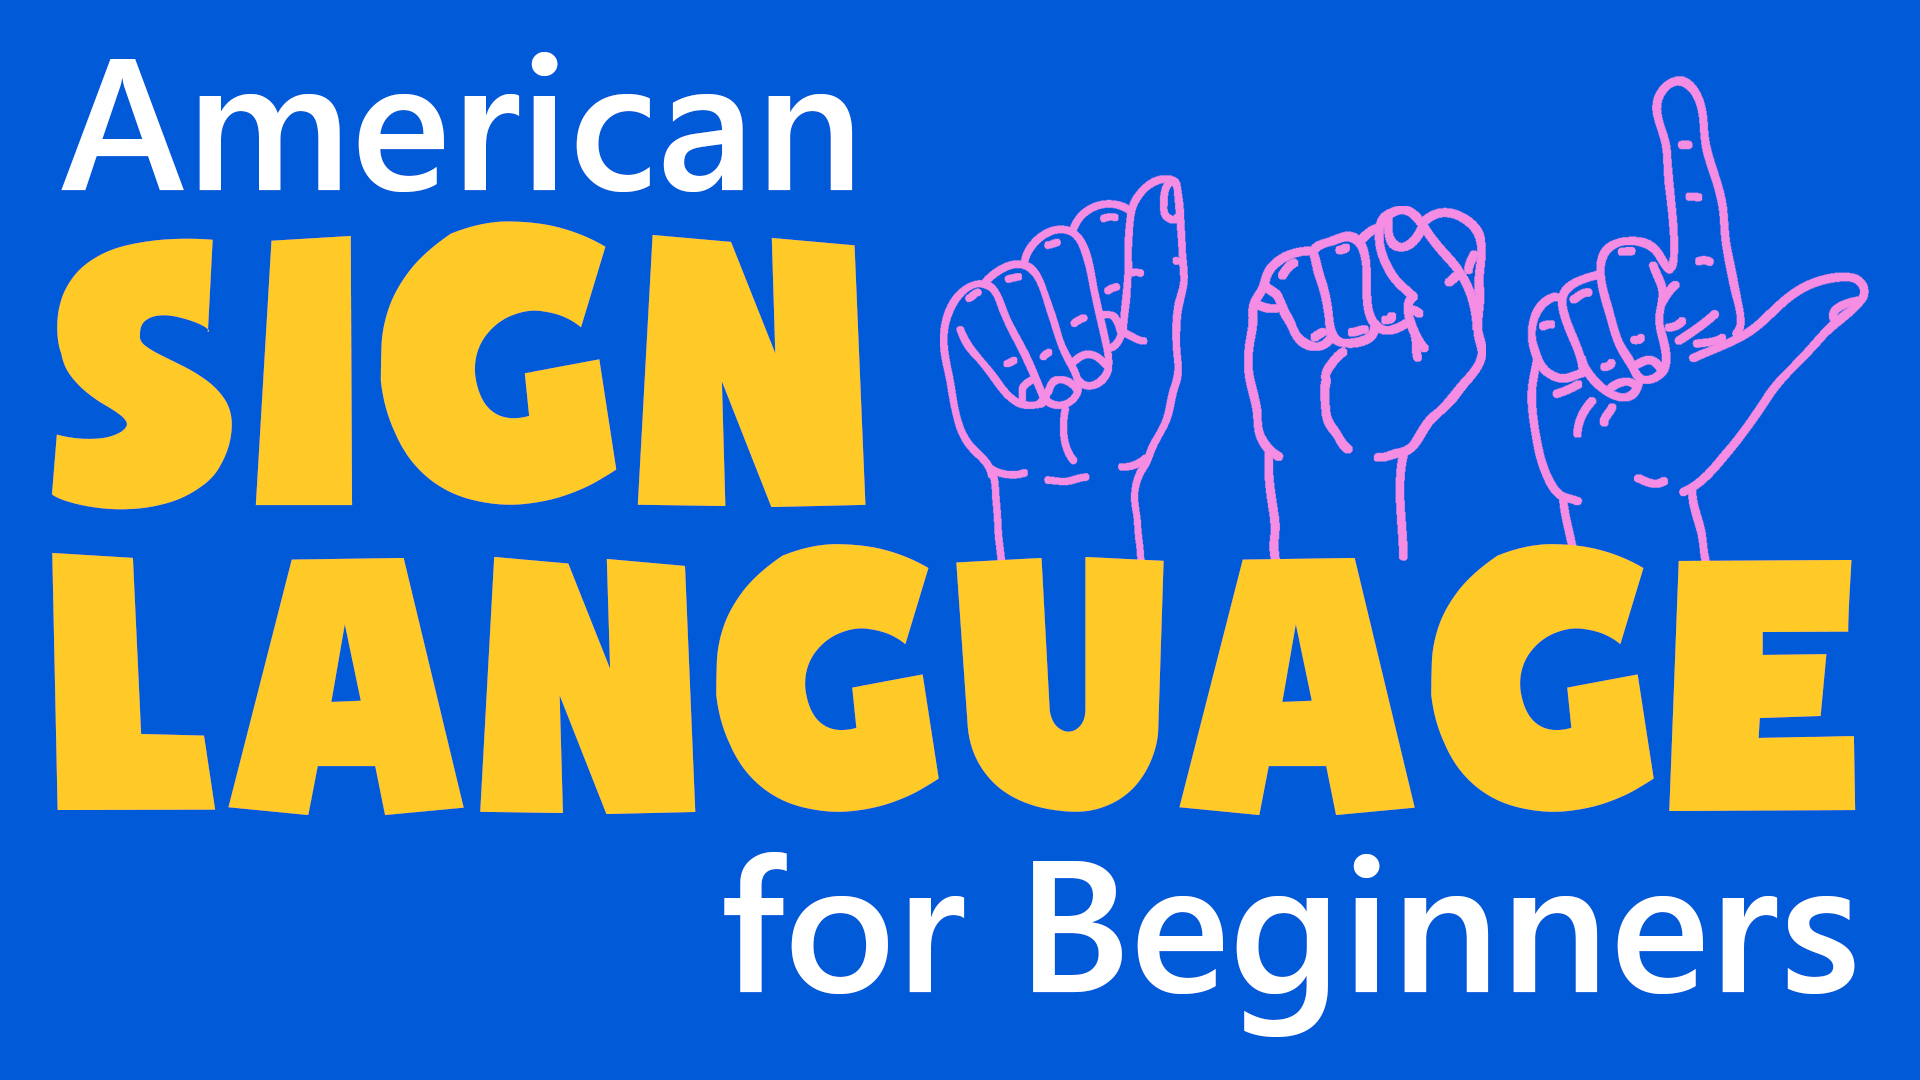 Image reads "American Sign Language for Beginners" in yellow against a blue background. Hands spelling out "ASL" are in pink on the right side of the image.